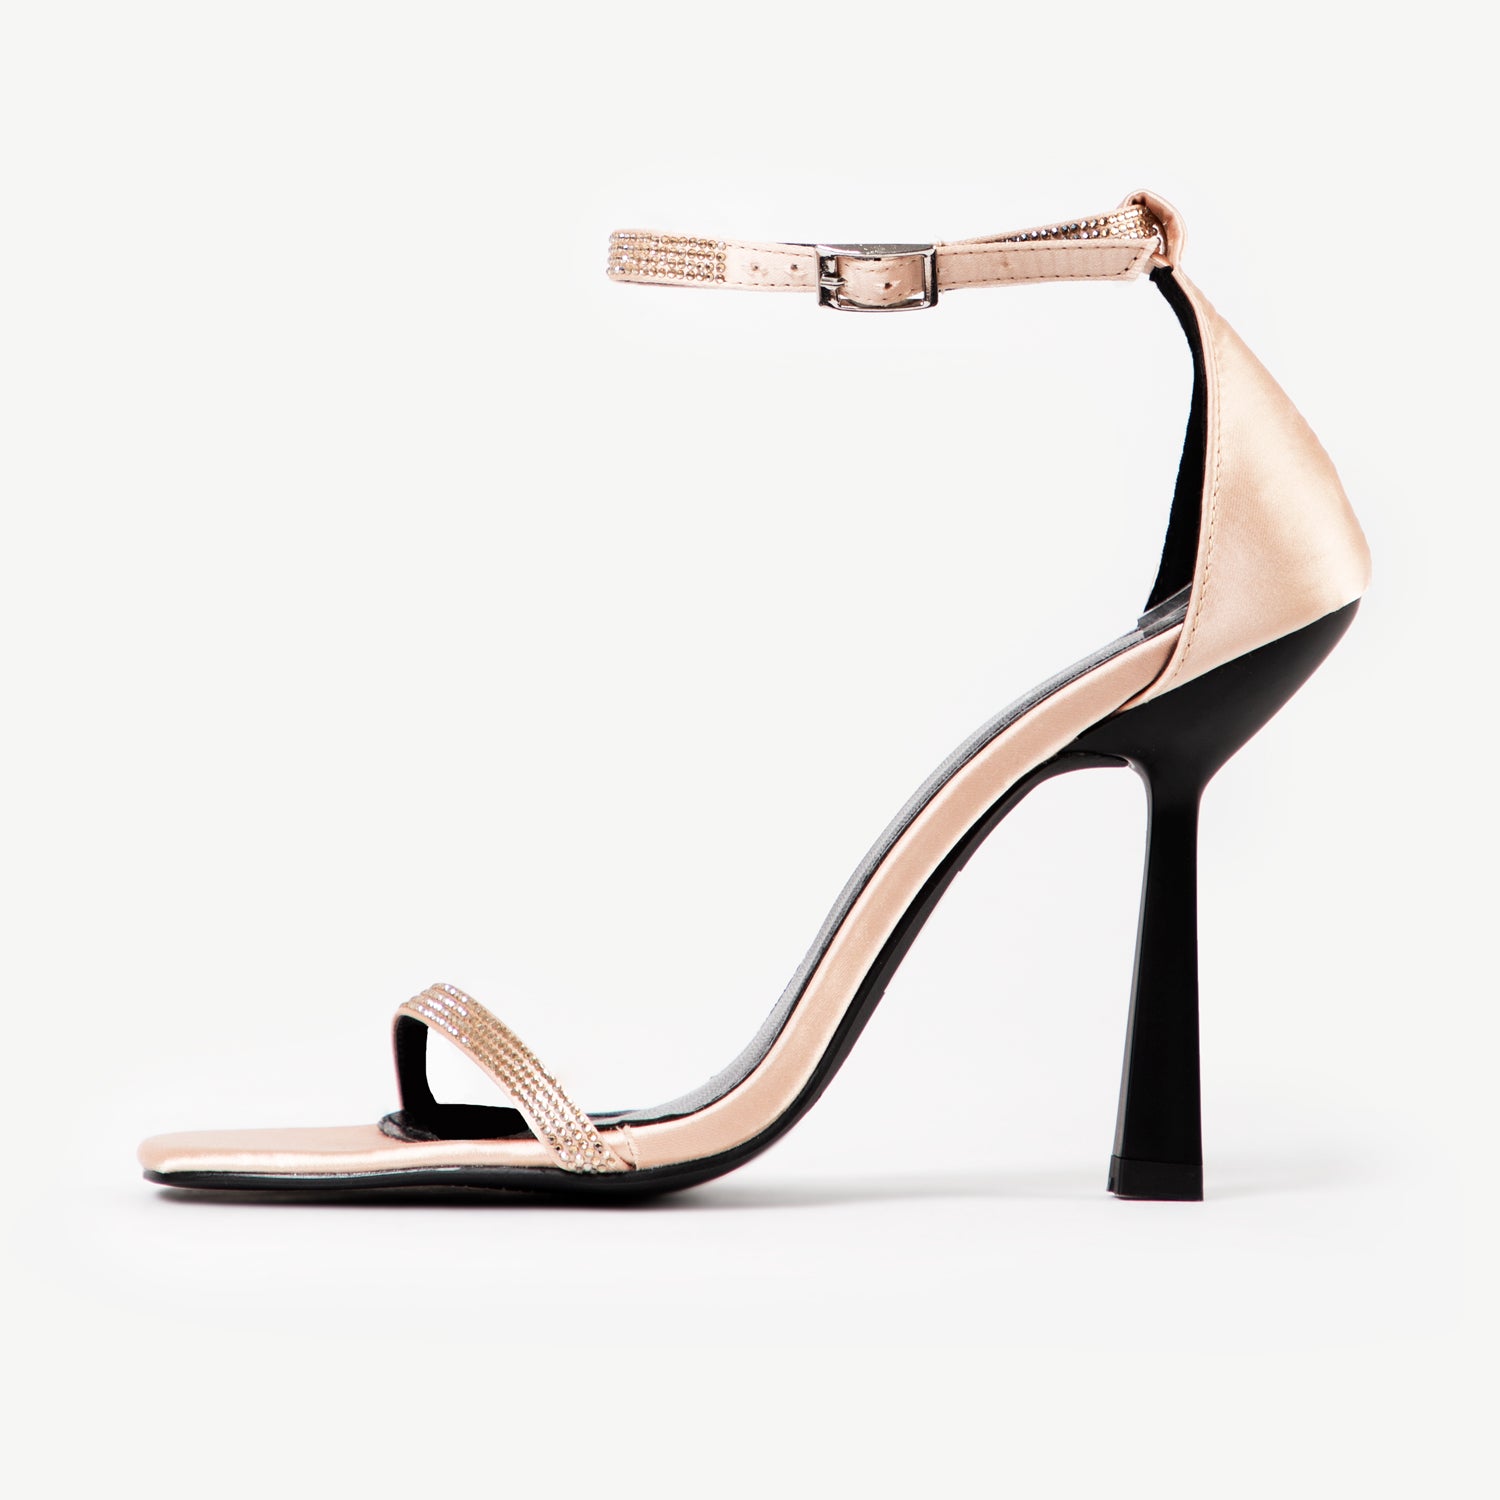 BEBO Cassidy Heeled Sandal in Champagne Satin